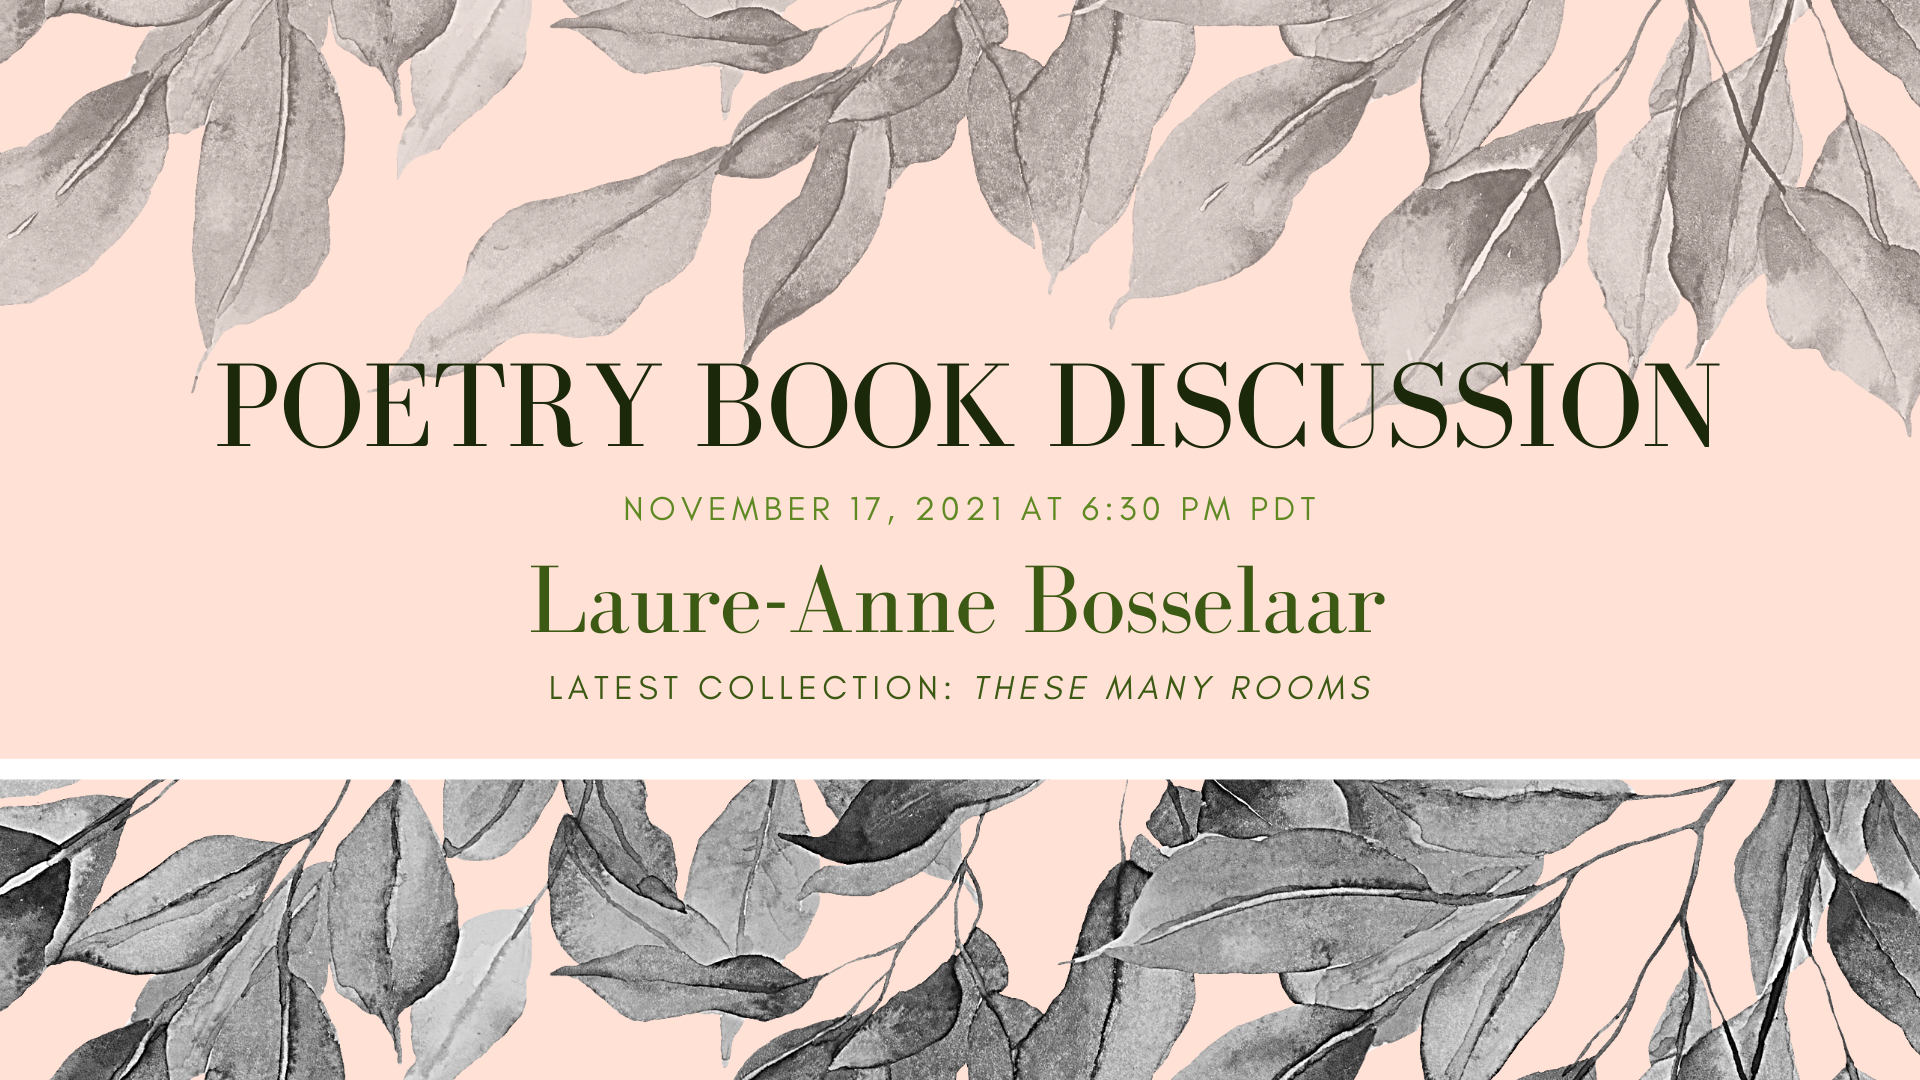 Poetry book discussion November 17 6:30 pm Laure-Ann Bosselaar's THESE MANY ROOMS